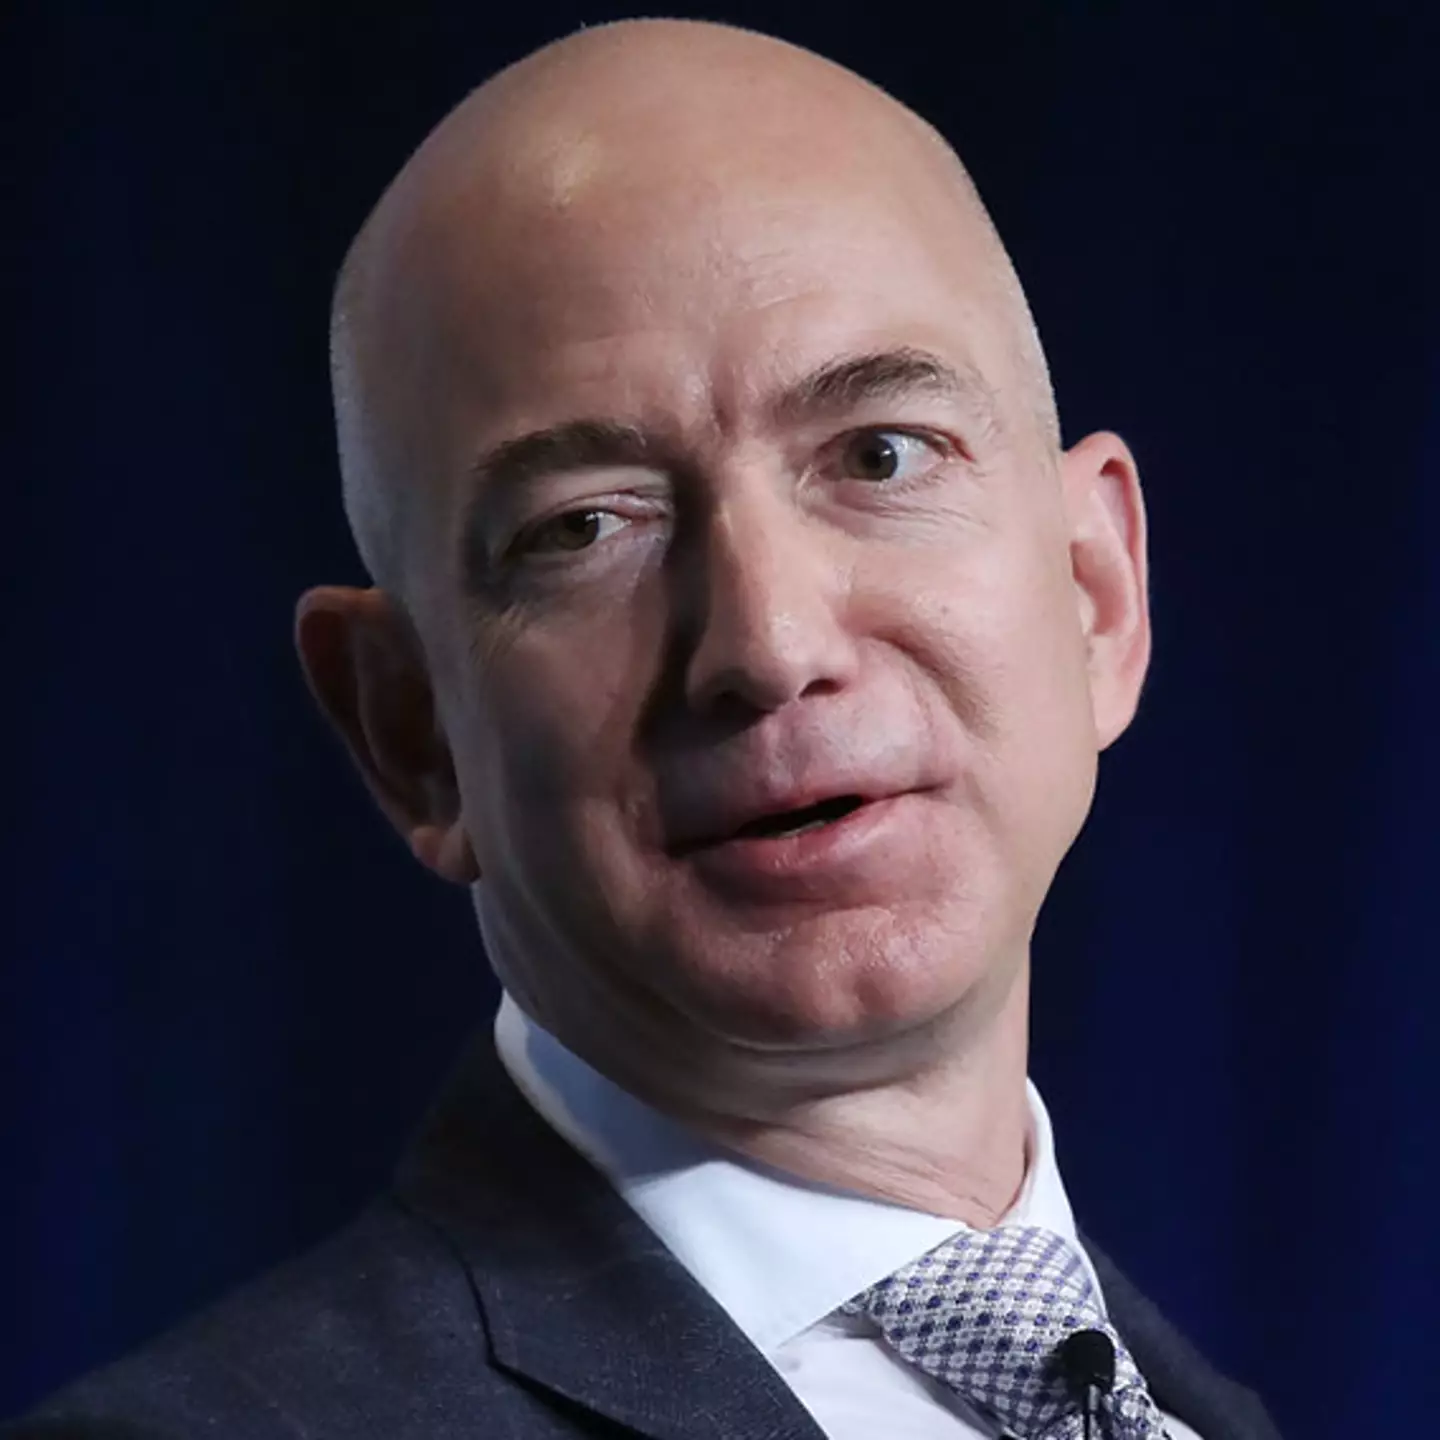 Jeff Bezos only used two questions to interview a potential employee and hired her on the spot